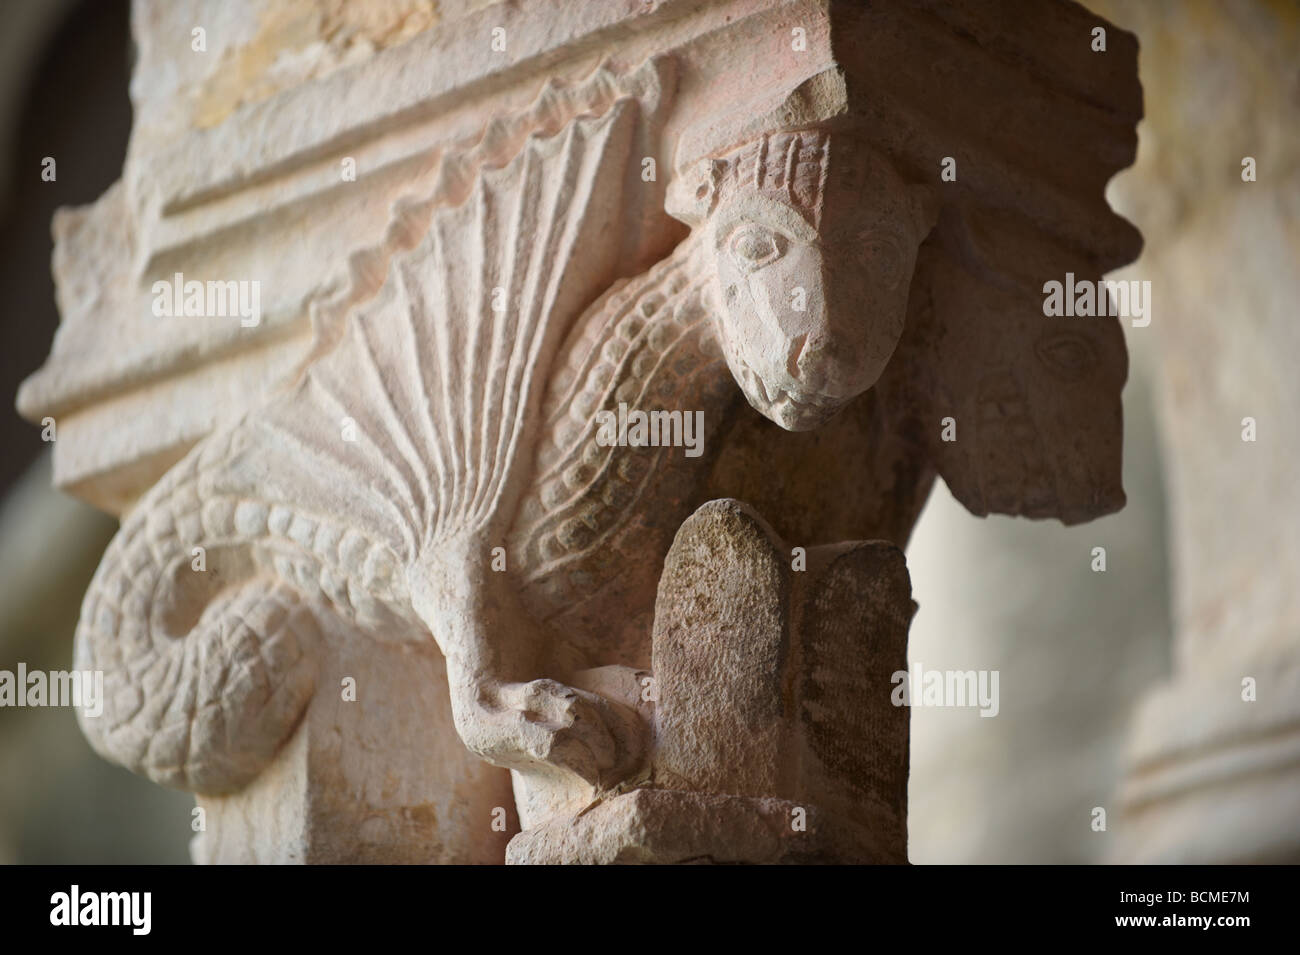 Sculptured face historiated Romanesque column Capitals - Franciscan Monatery cloisters - Dubrovnik Stock Photo